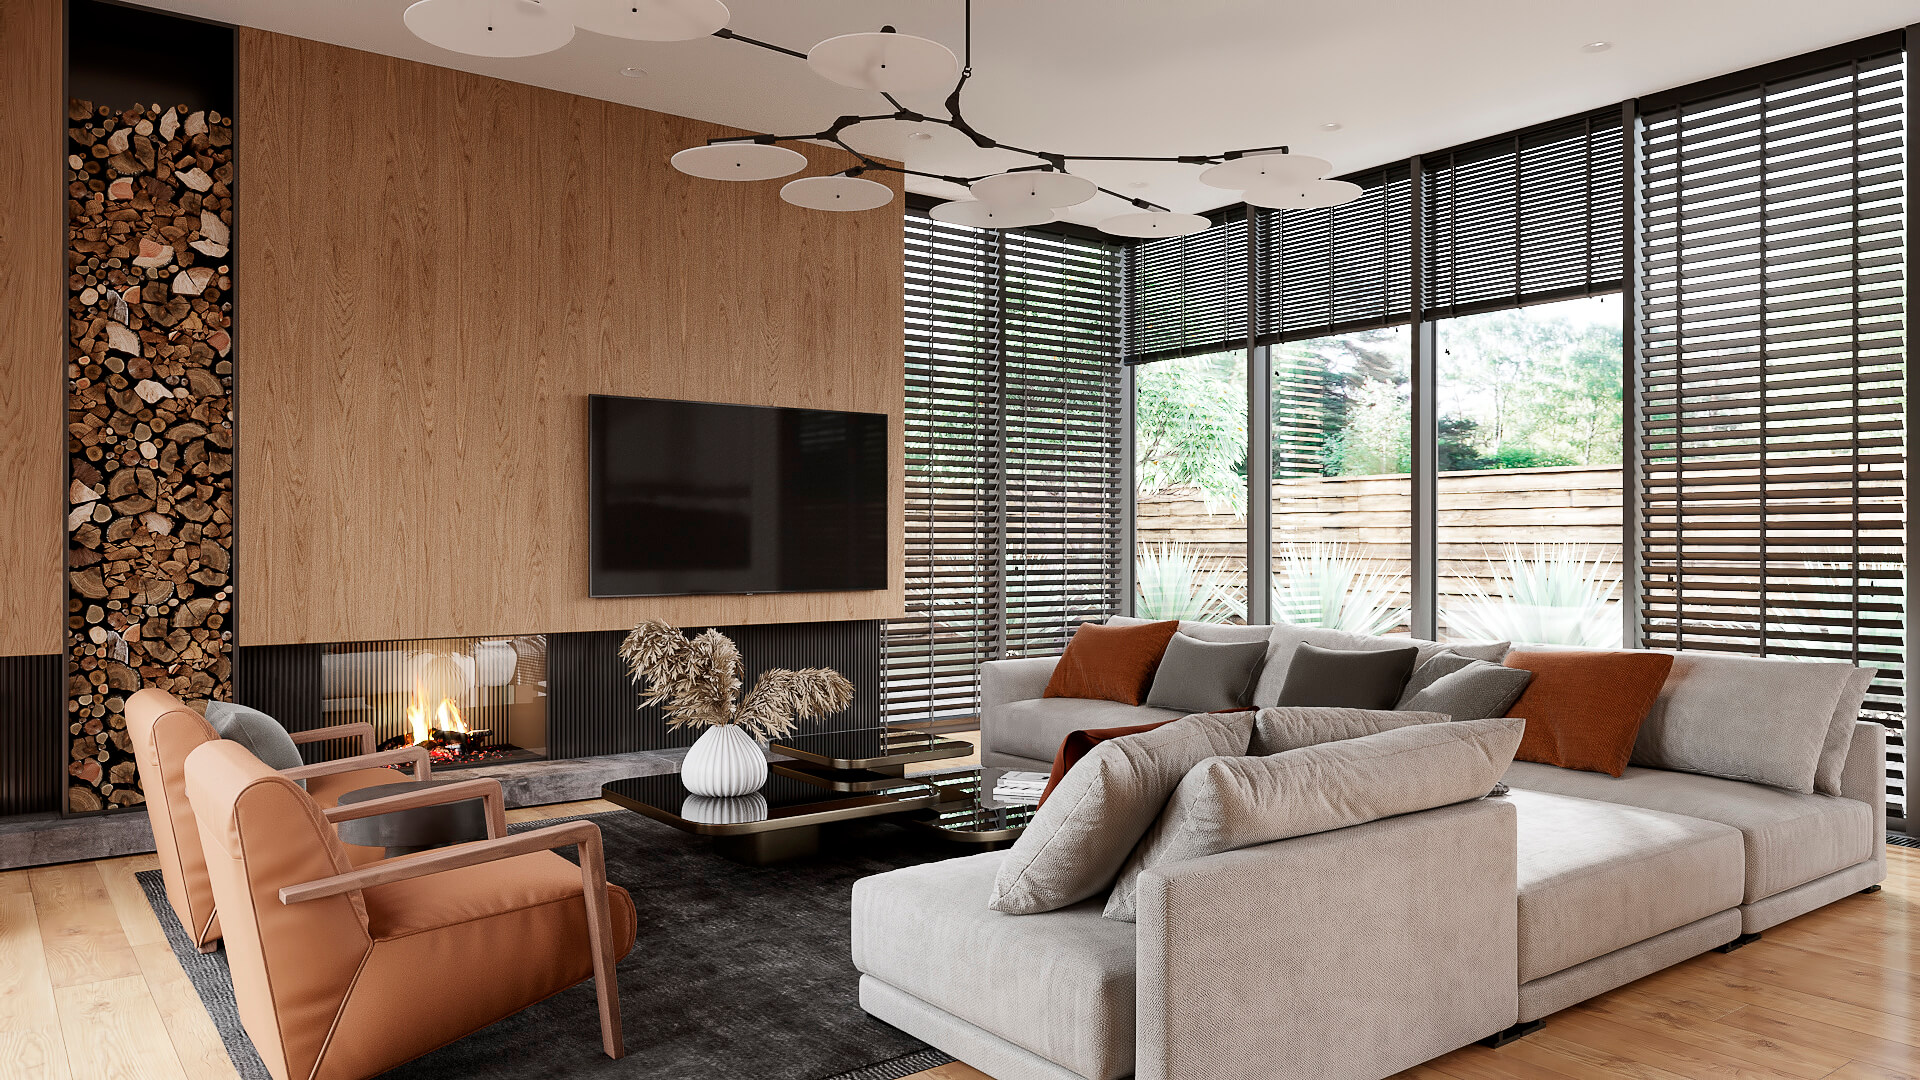 3D Rendering of a Living Room in the Modern Style